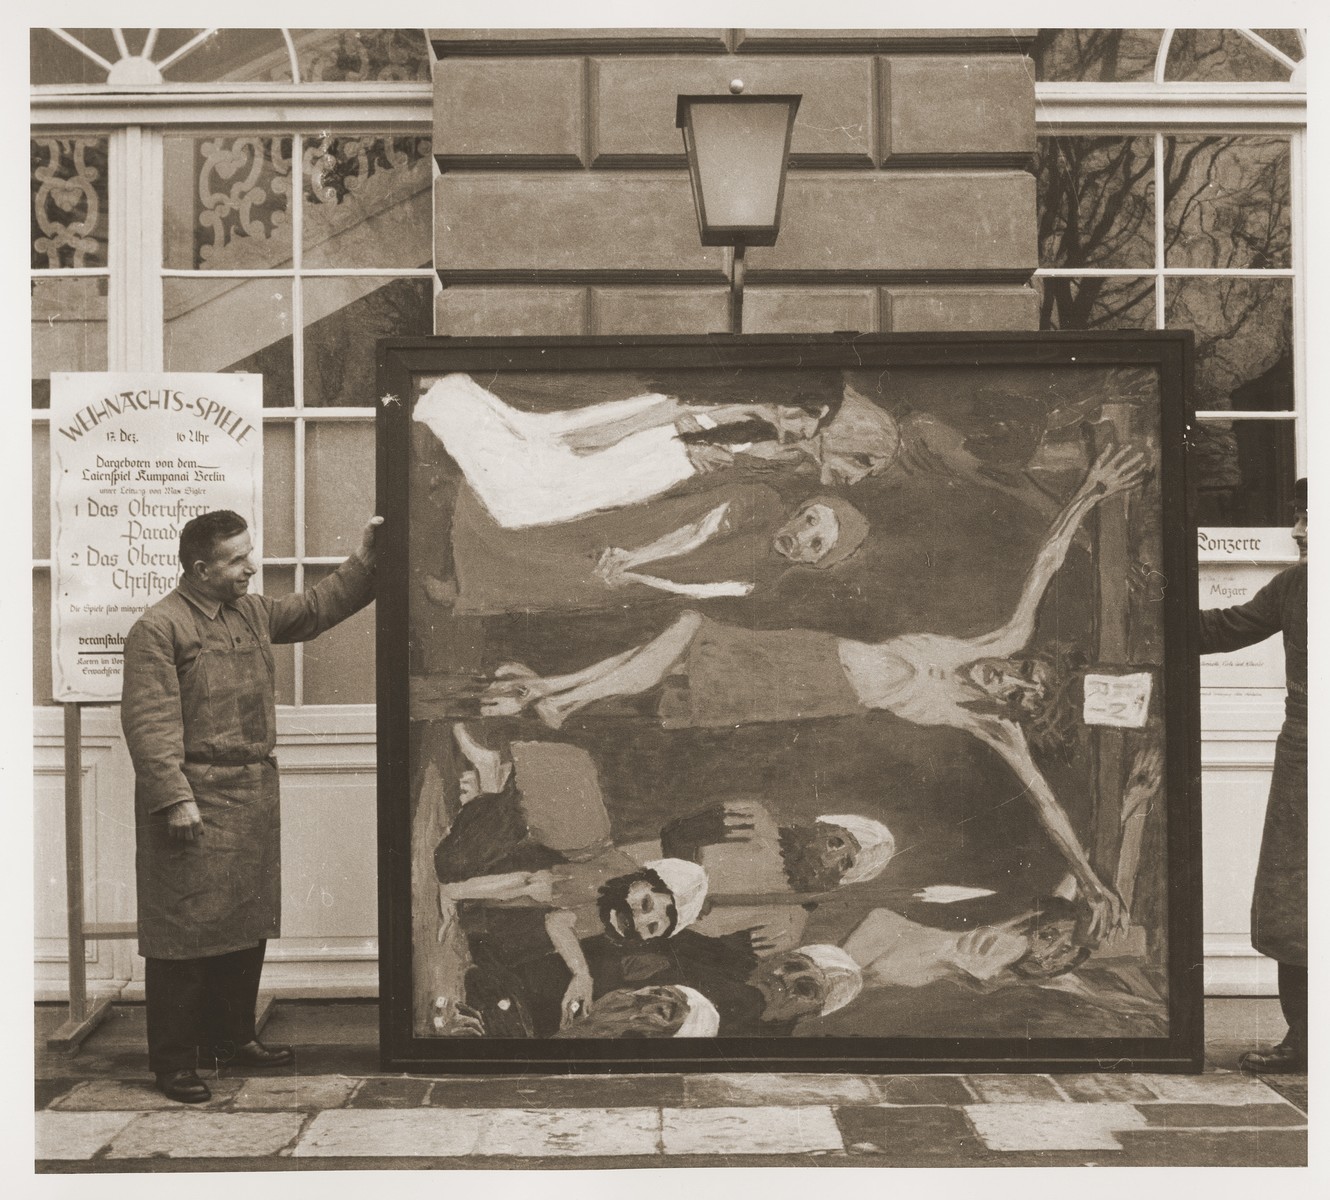 Art handlers hold a confiscated artwork by Emil Nolde